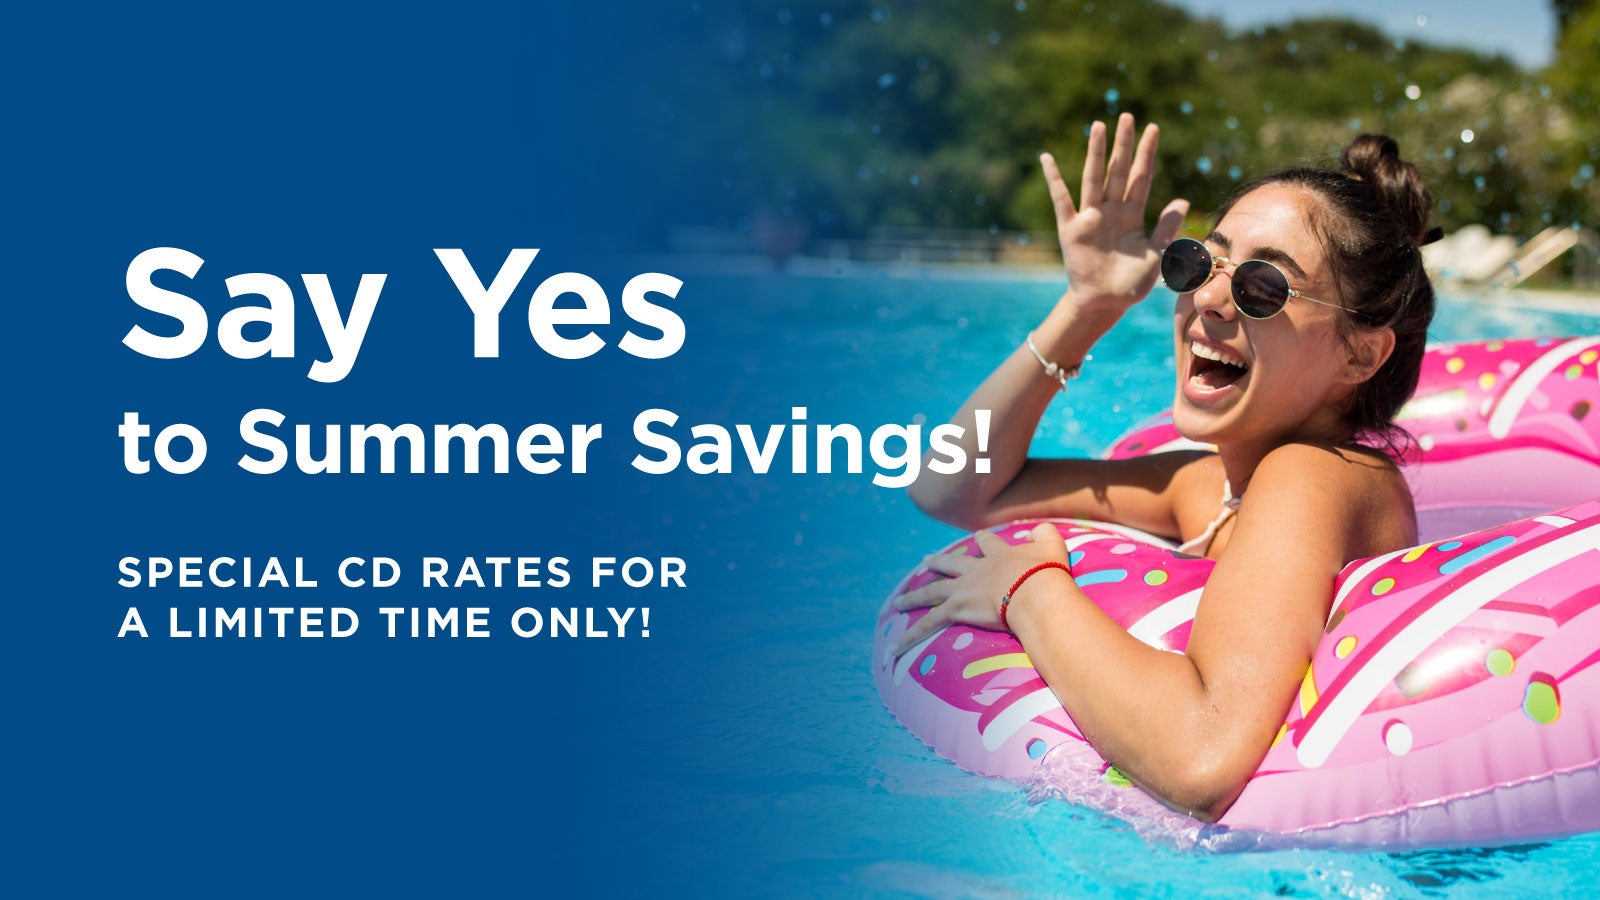 Say Yes to Summer Savings with a Special CD Rate at FIBT